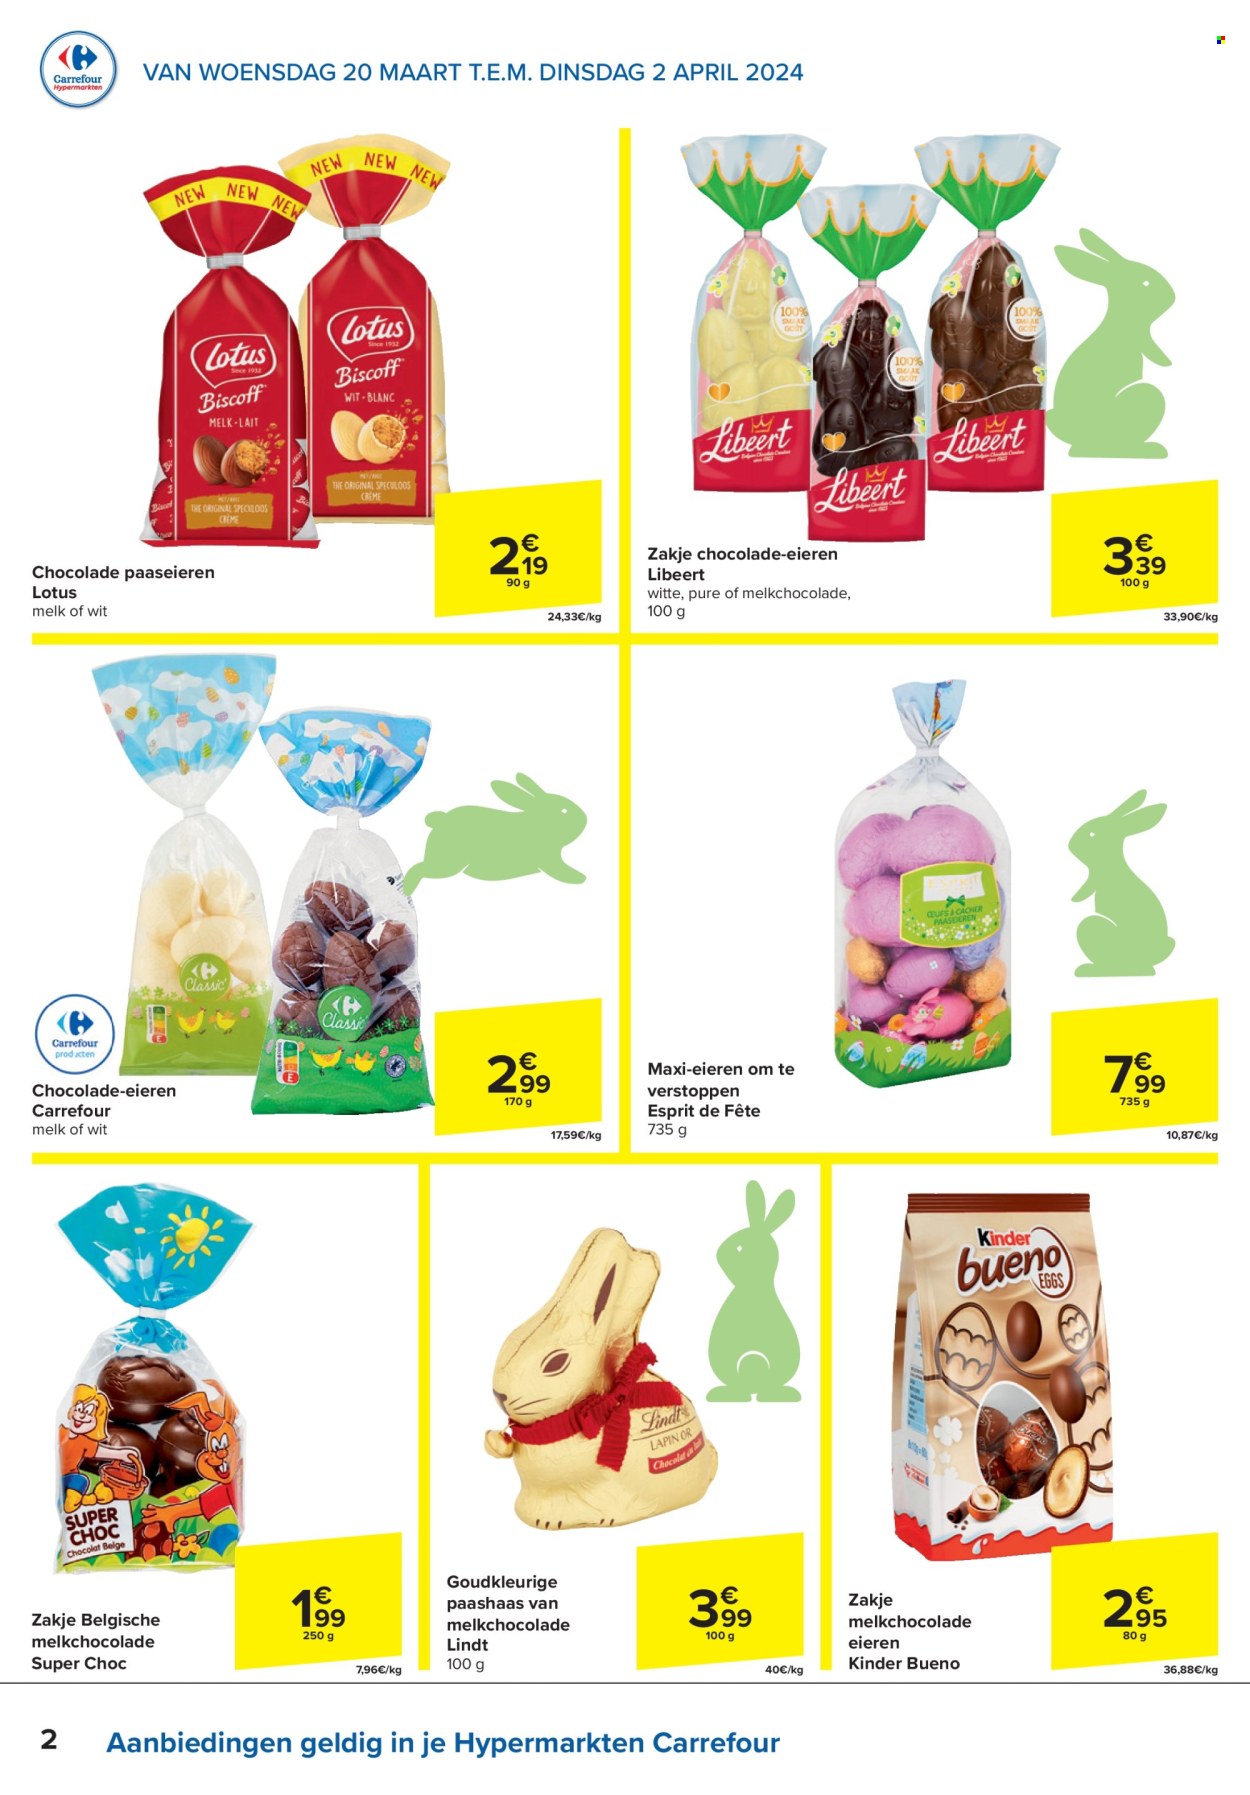 Catalogue Carrefour hypermarkt - 20.3.2024 - 2.4.2024. Page 2.